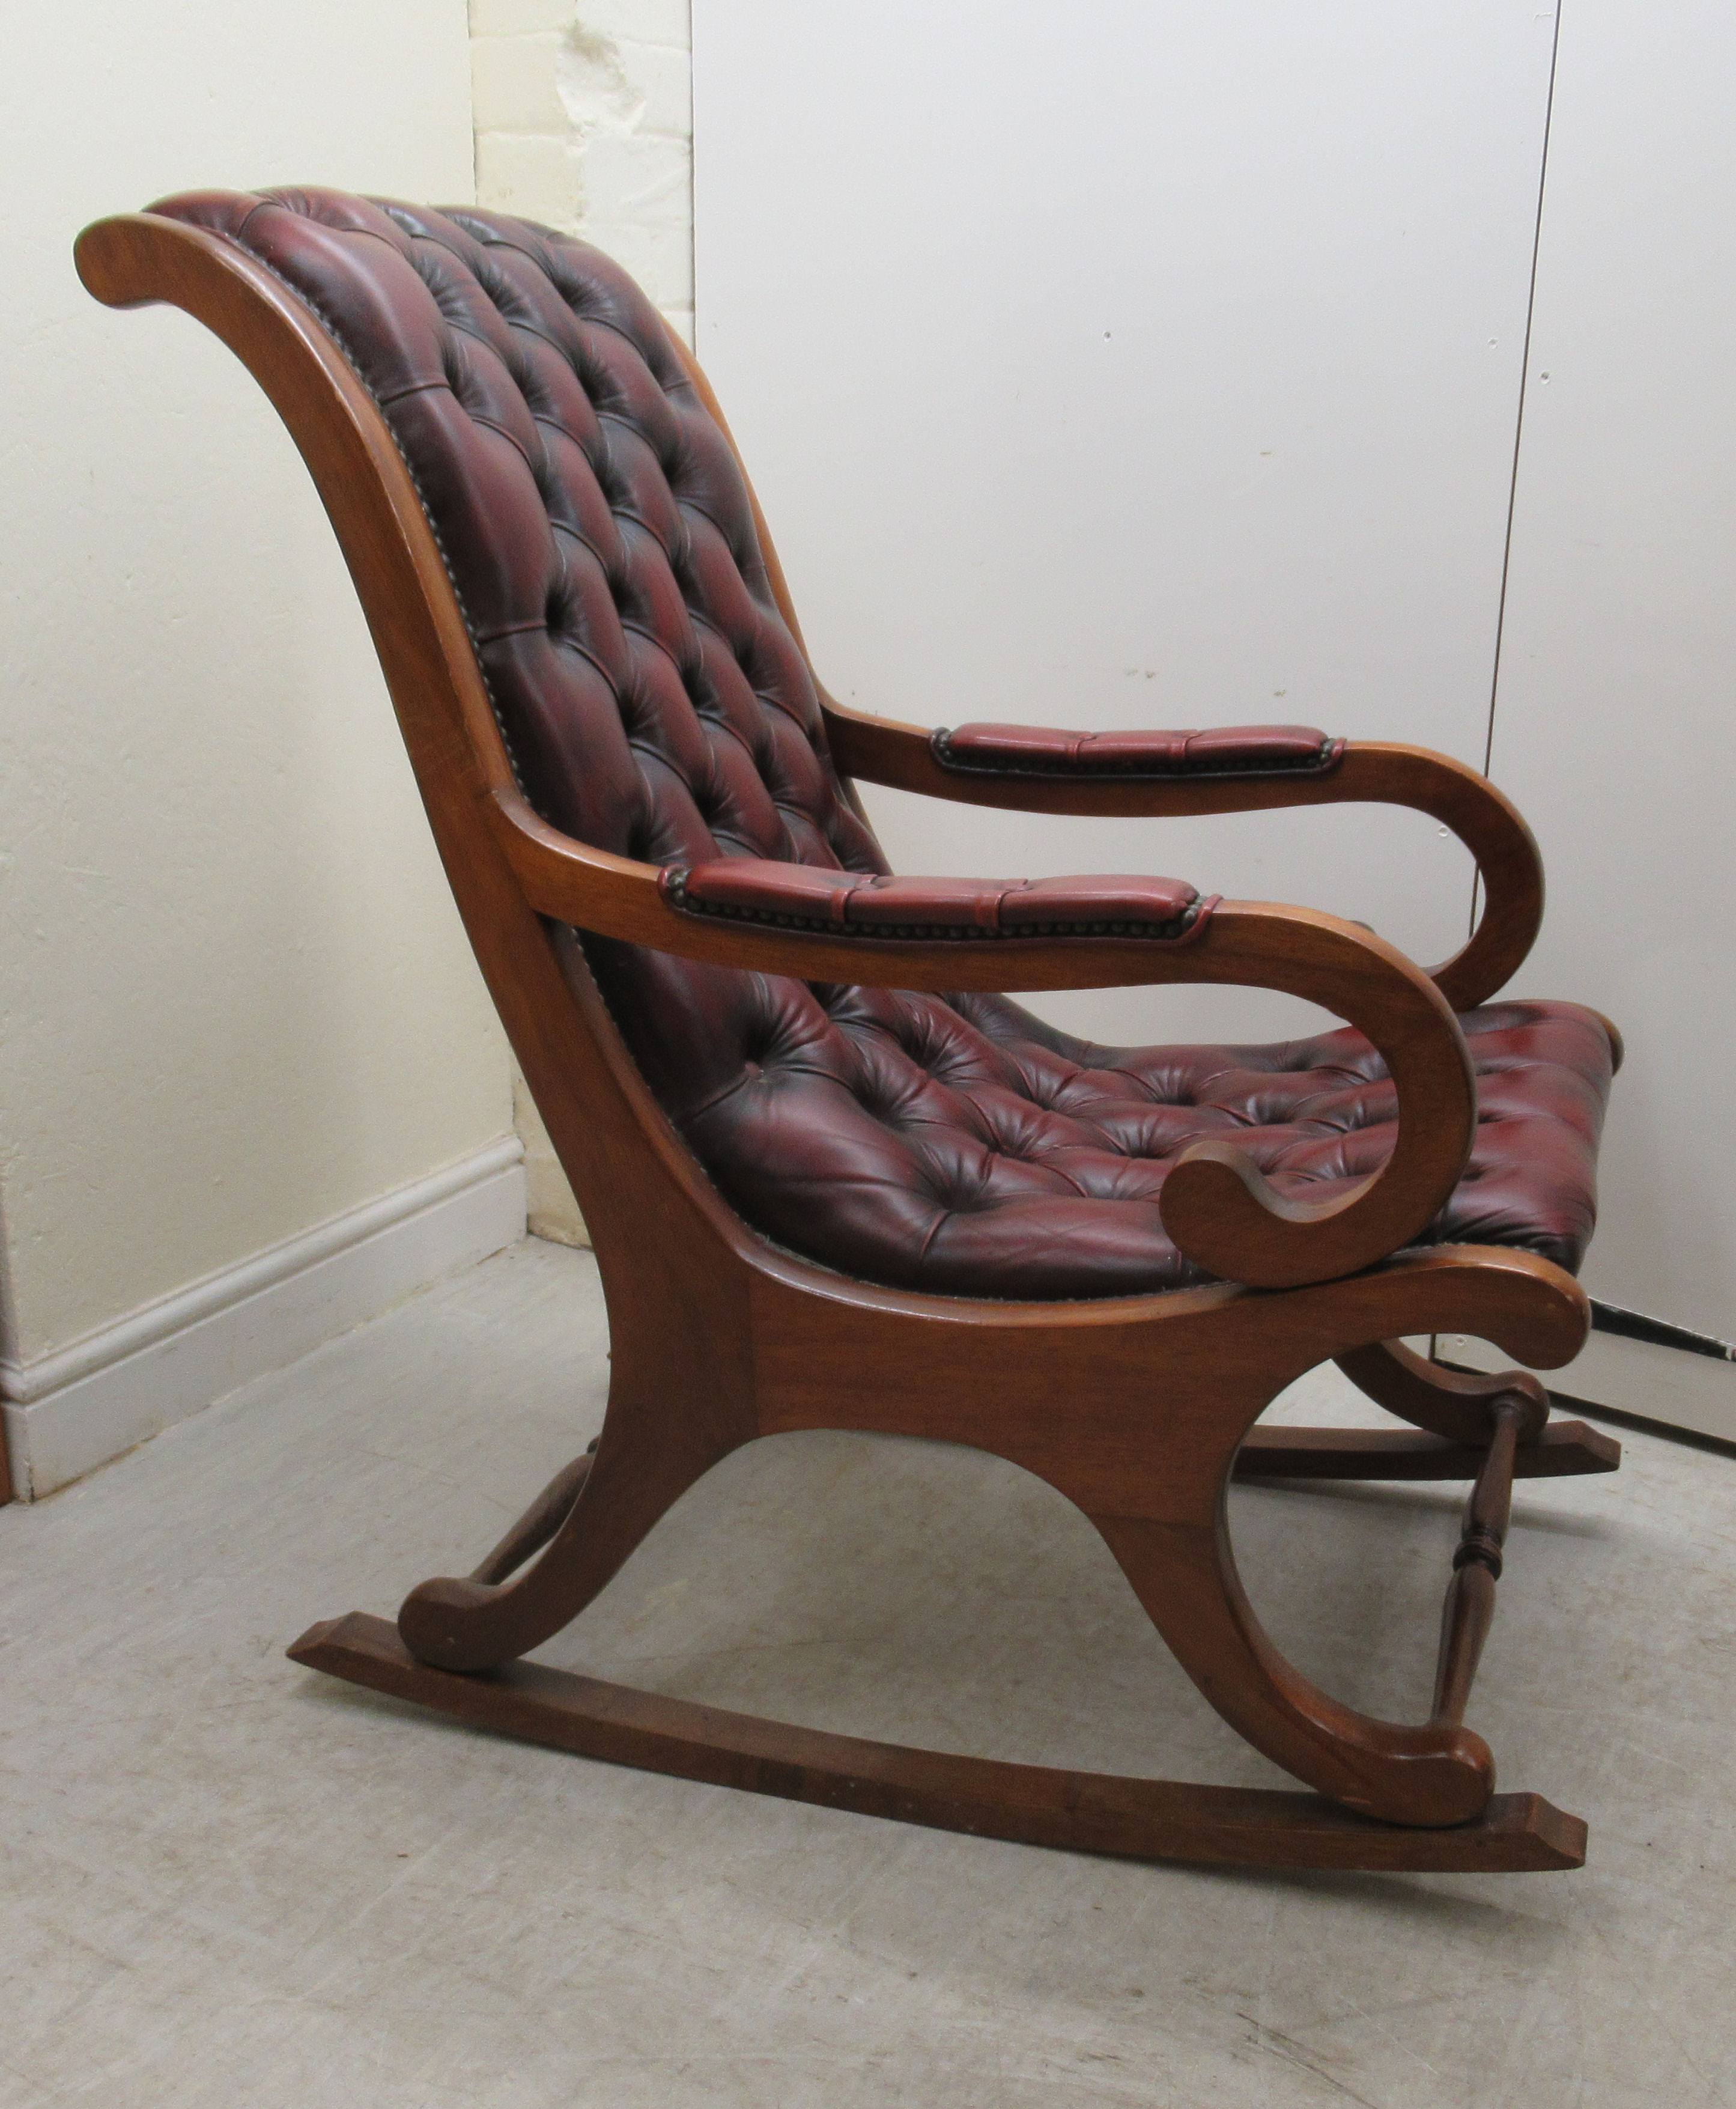 A Victorian style mahogany framed rocking chair with open, scrolled arms, - Image 2 of 4